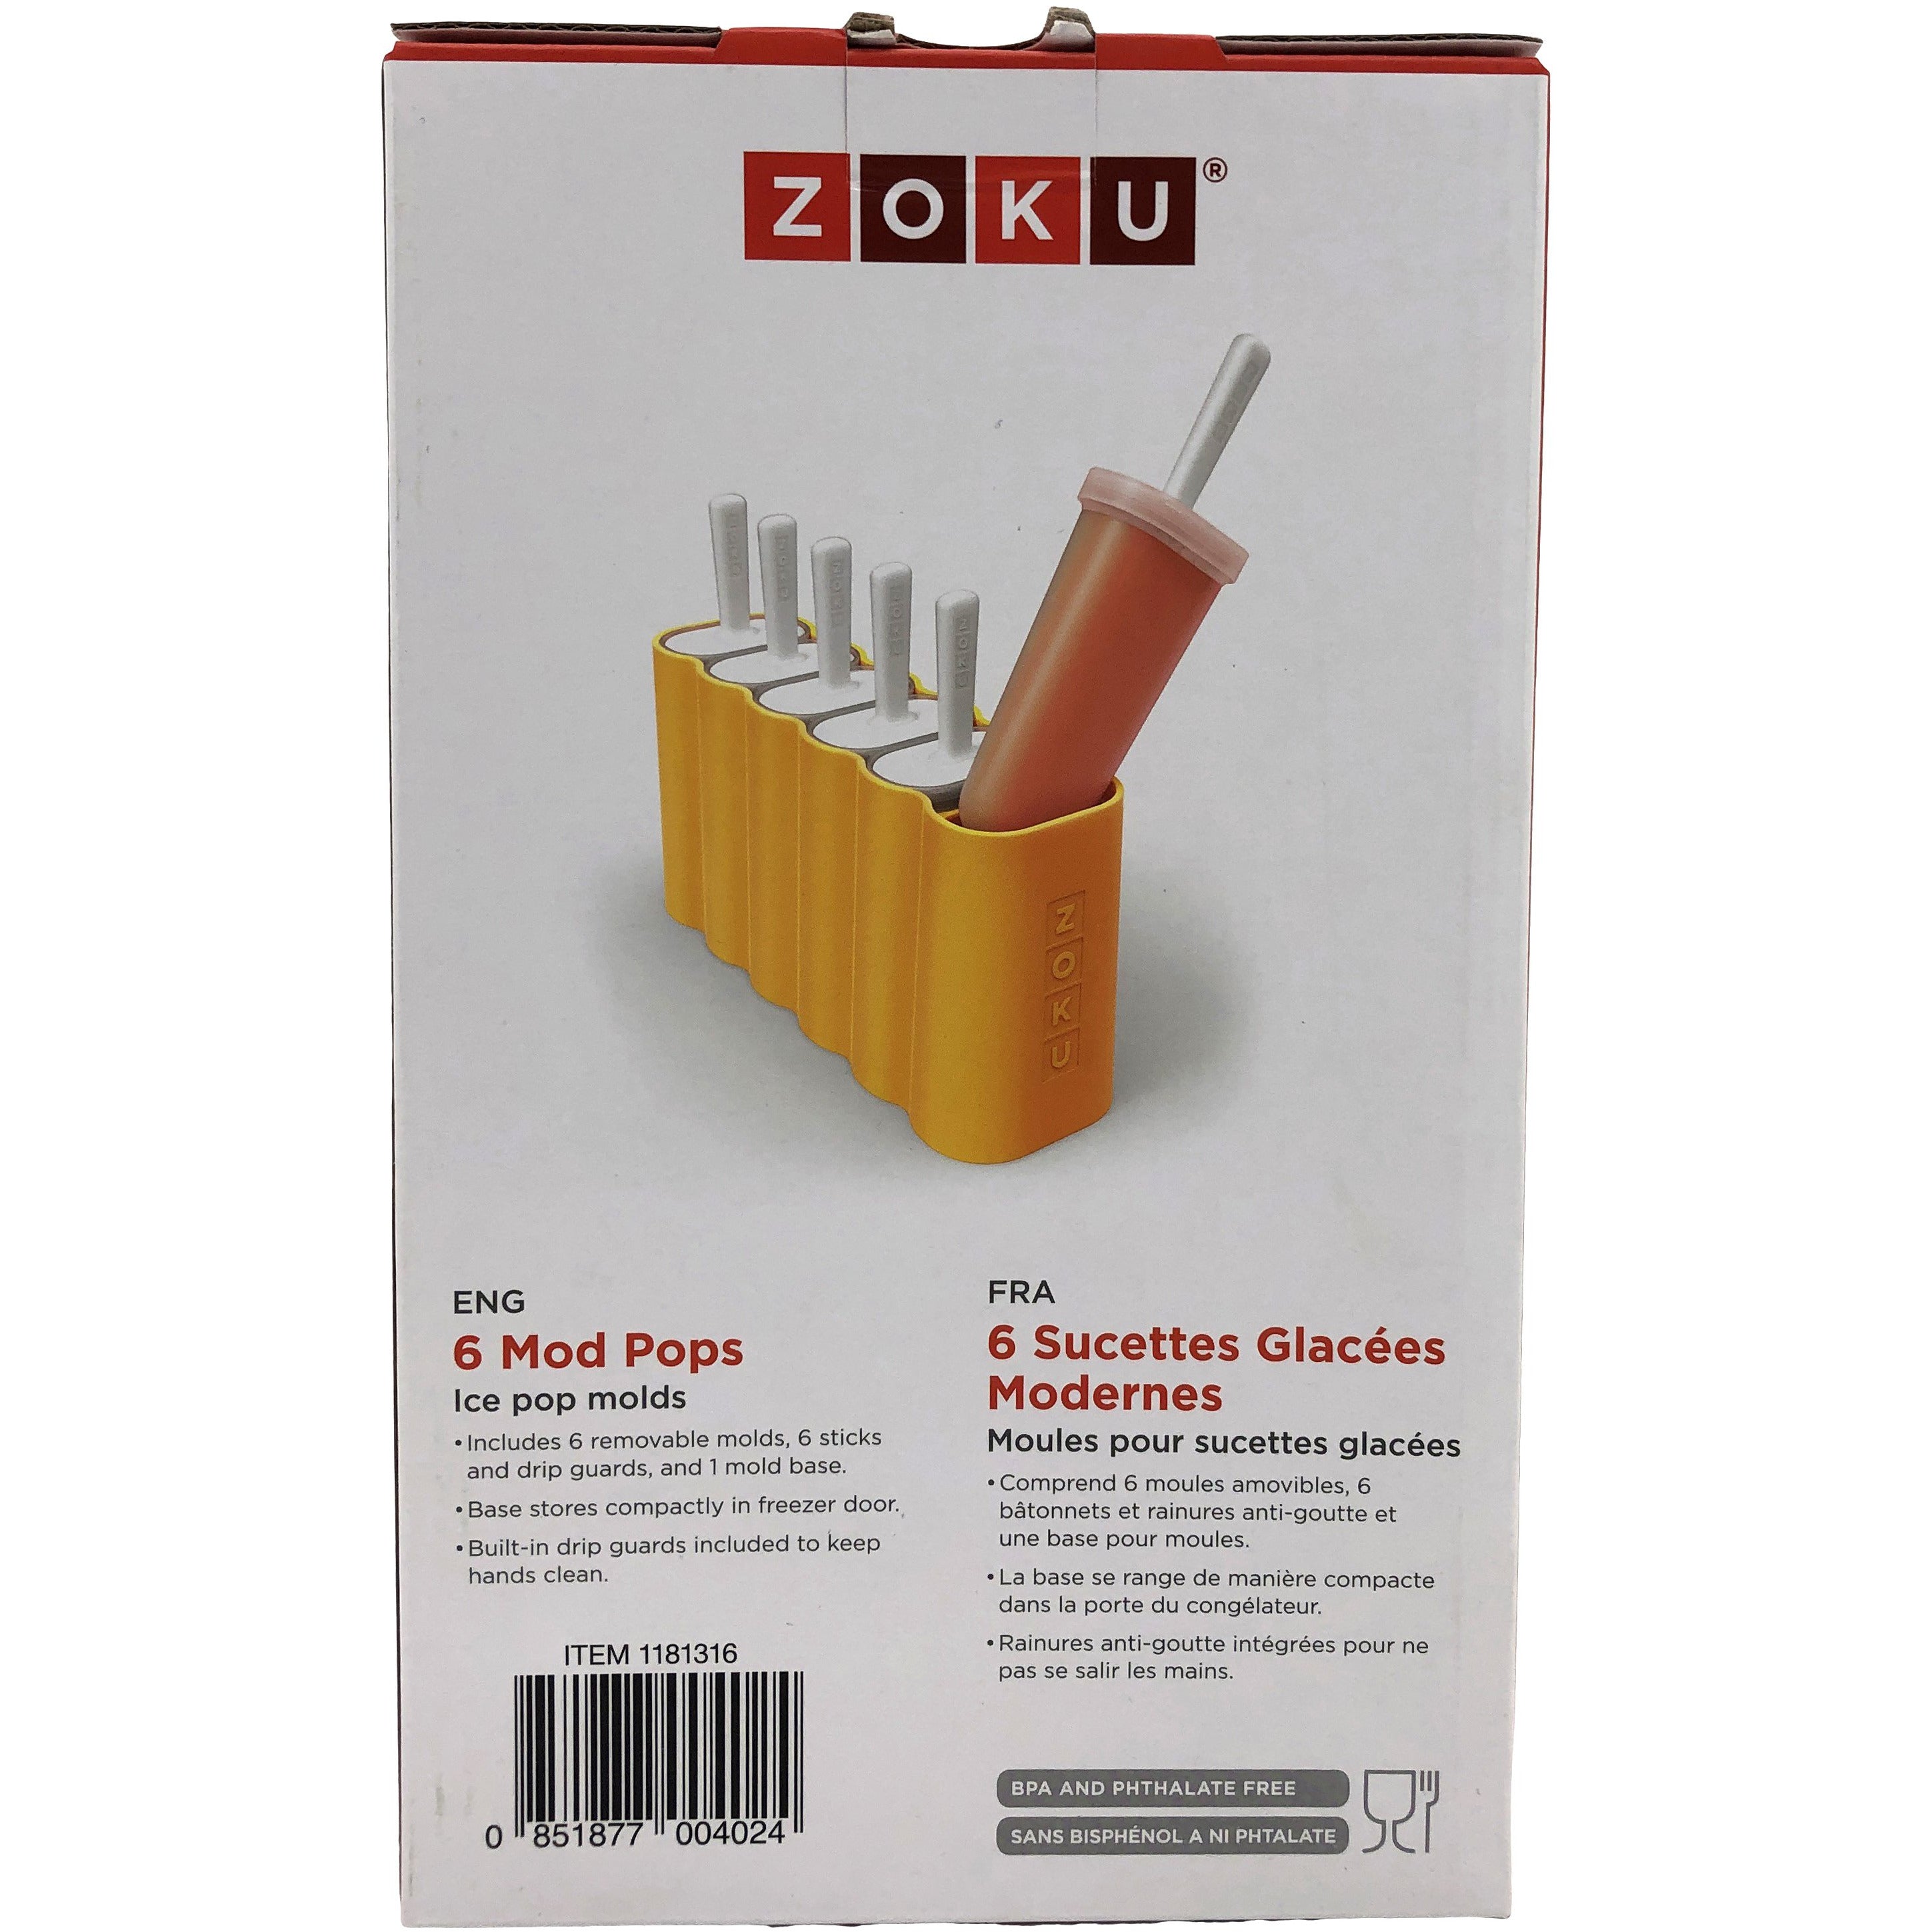 Zoku Mod pop 6 pack of home popsicle making molds BPA Free